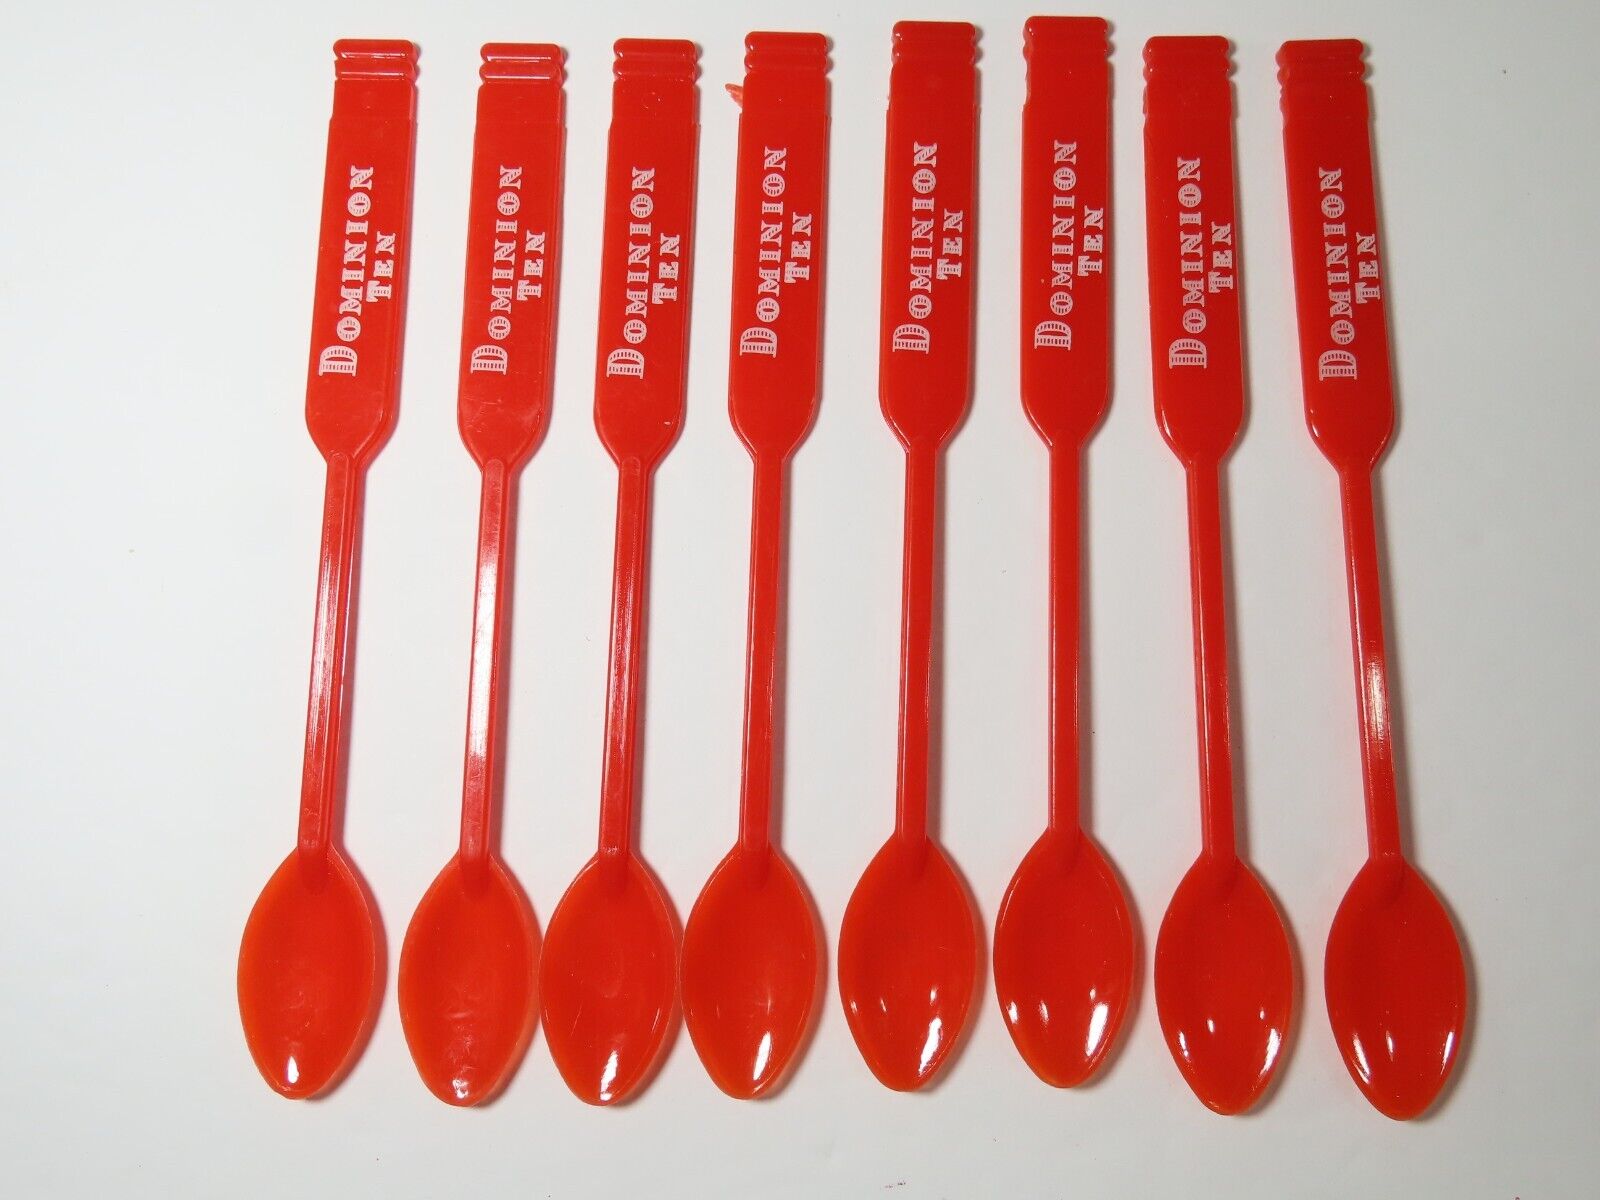 8 Vintage Swizzle Cocktail Sticks Spoon Canadian Whiskey 86 Proof Dominion C2283